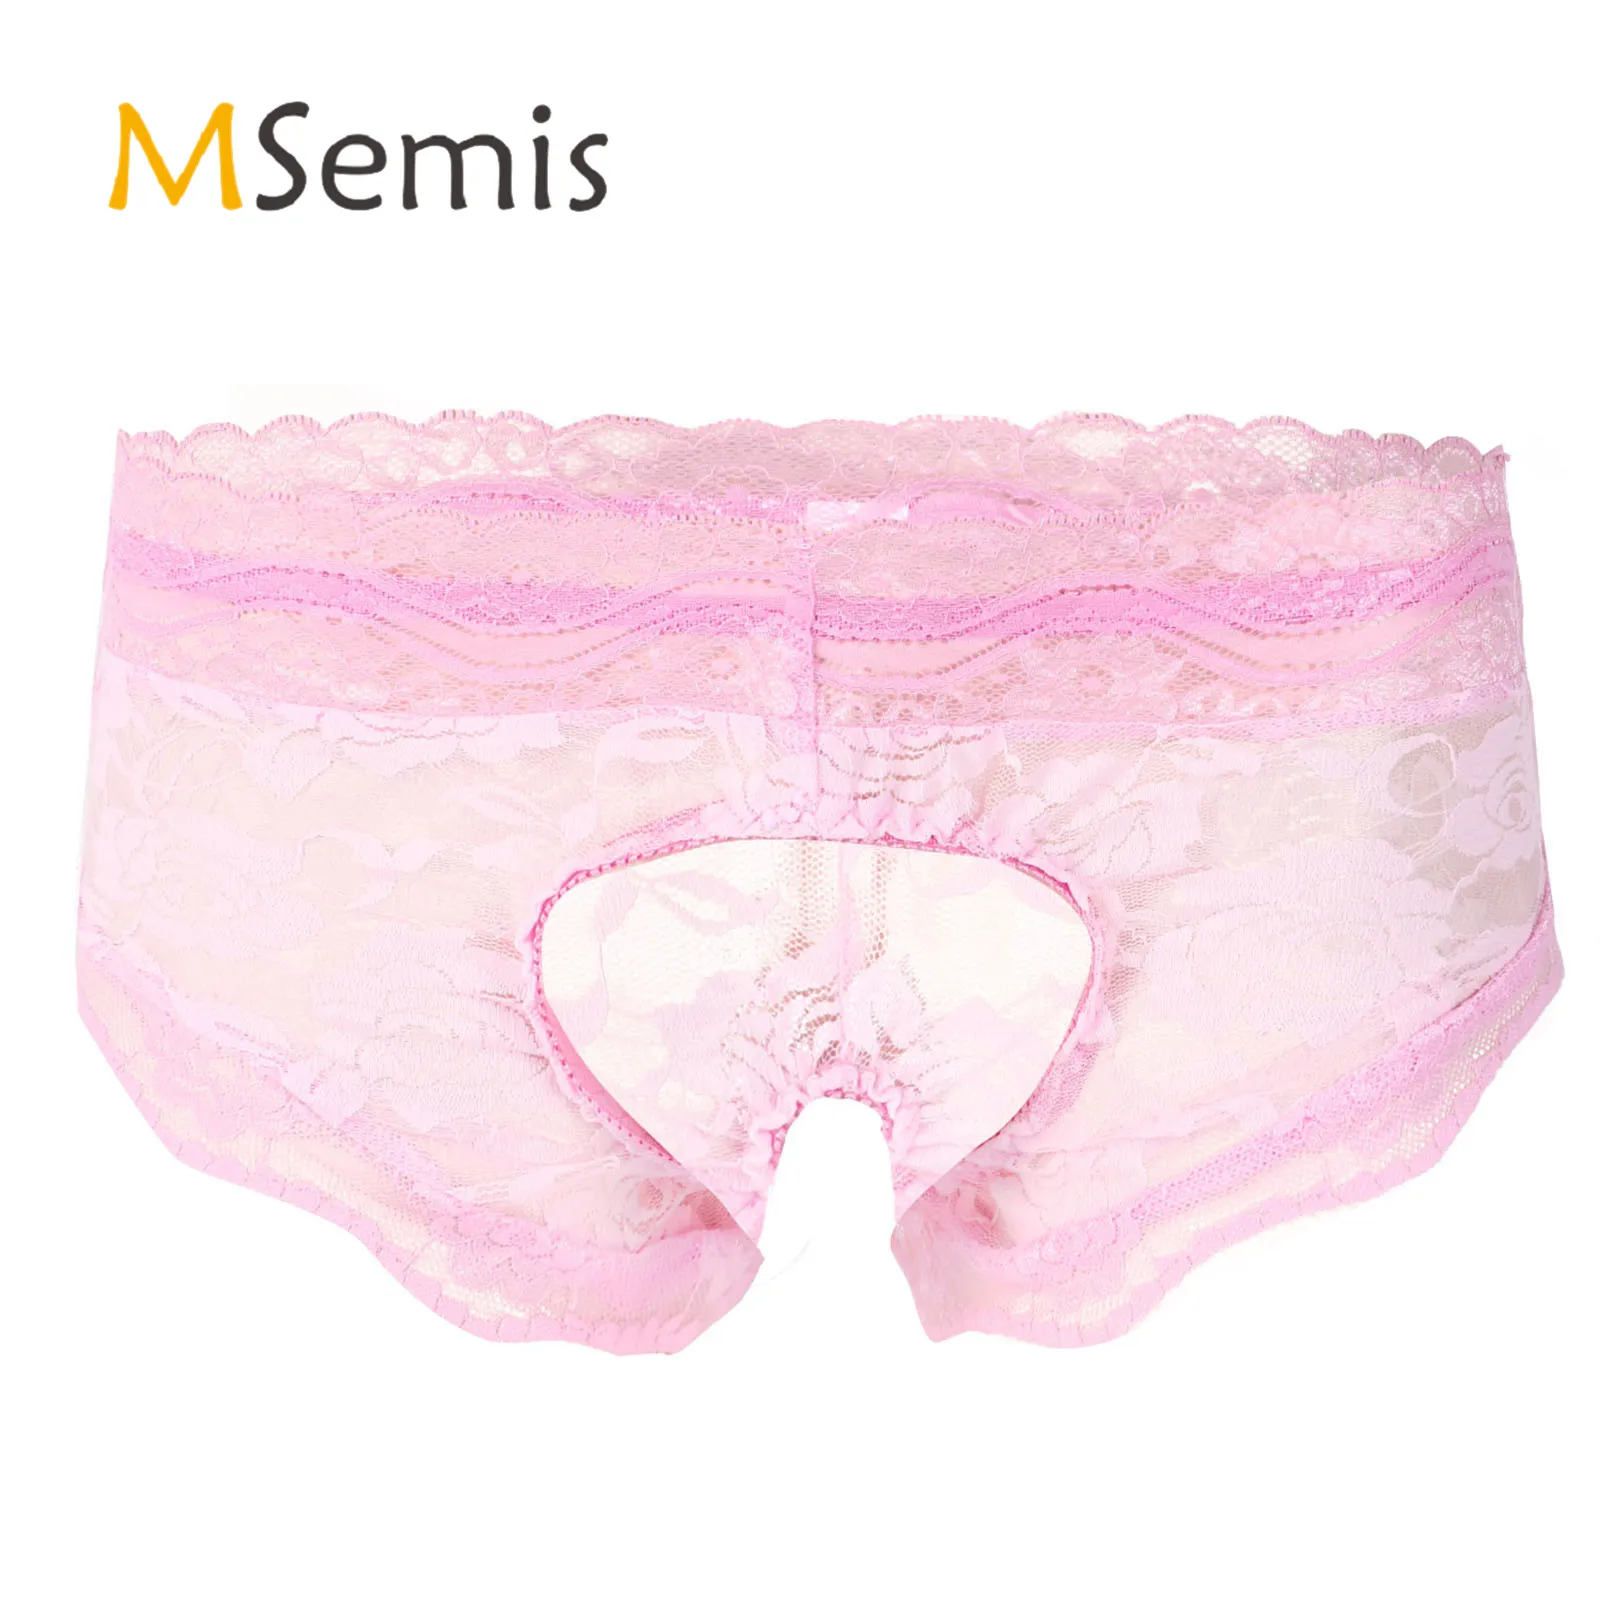 

Mens Exotic Lingerie Panties See-through Lace Crotchless Briefs Boxer Shorts Open Crotch Sexy Gay Sissy Underwear Underpants